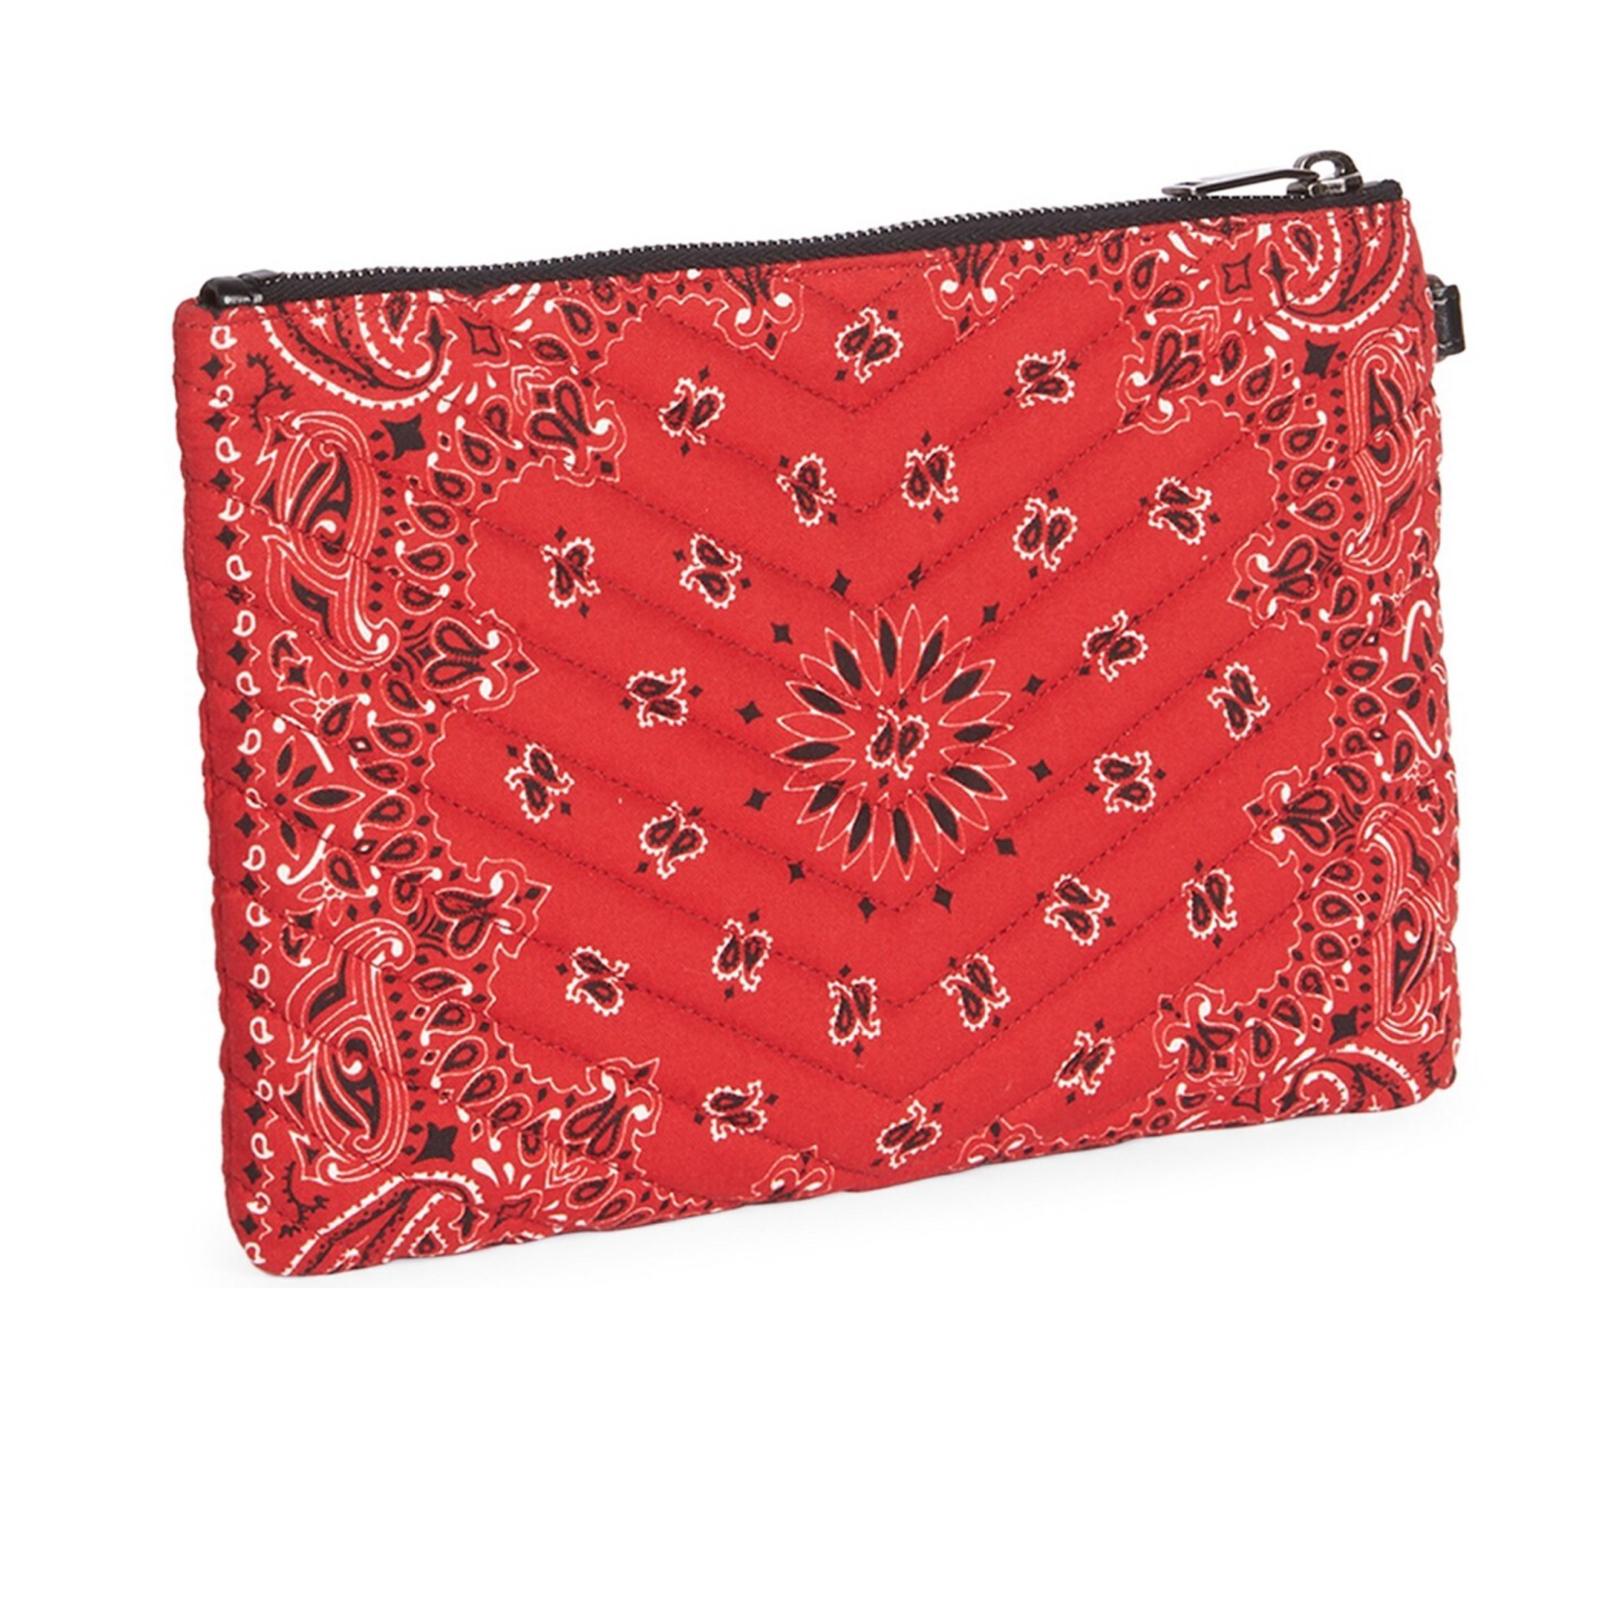 This pouch bag is made with red fabric with a paisley bandana print in black and white. The pouch features a polished aged silver YSL monogram logo at the front, an attachable black leather wristlet strap, top zip closure and an interior with black